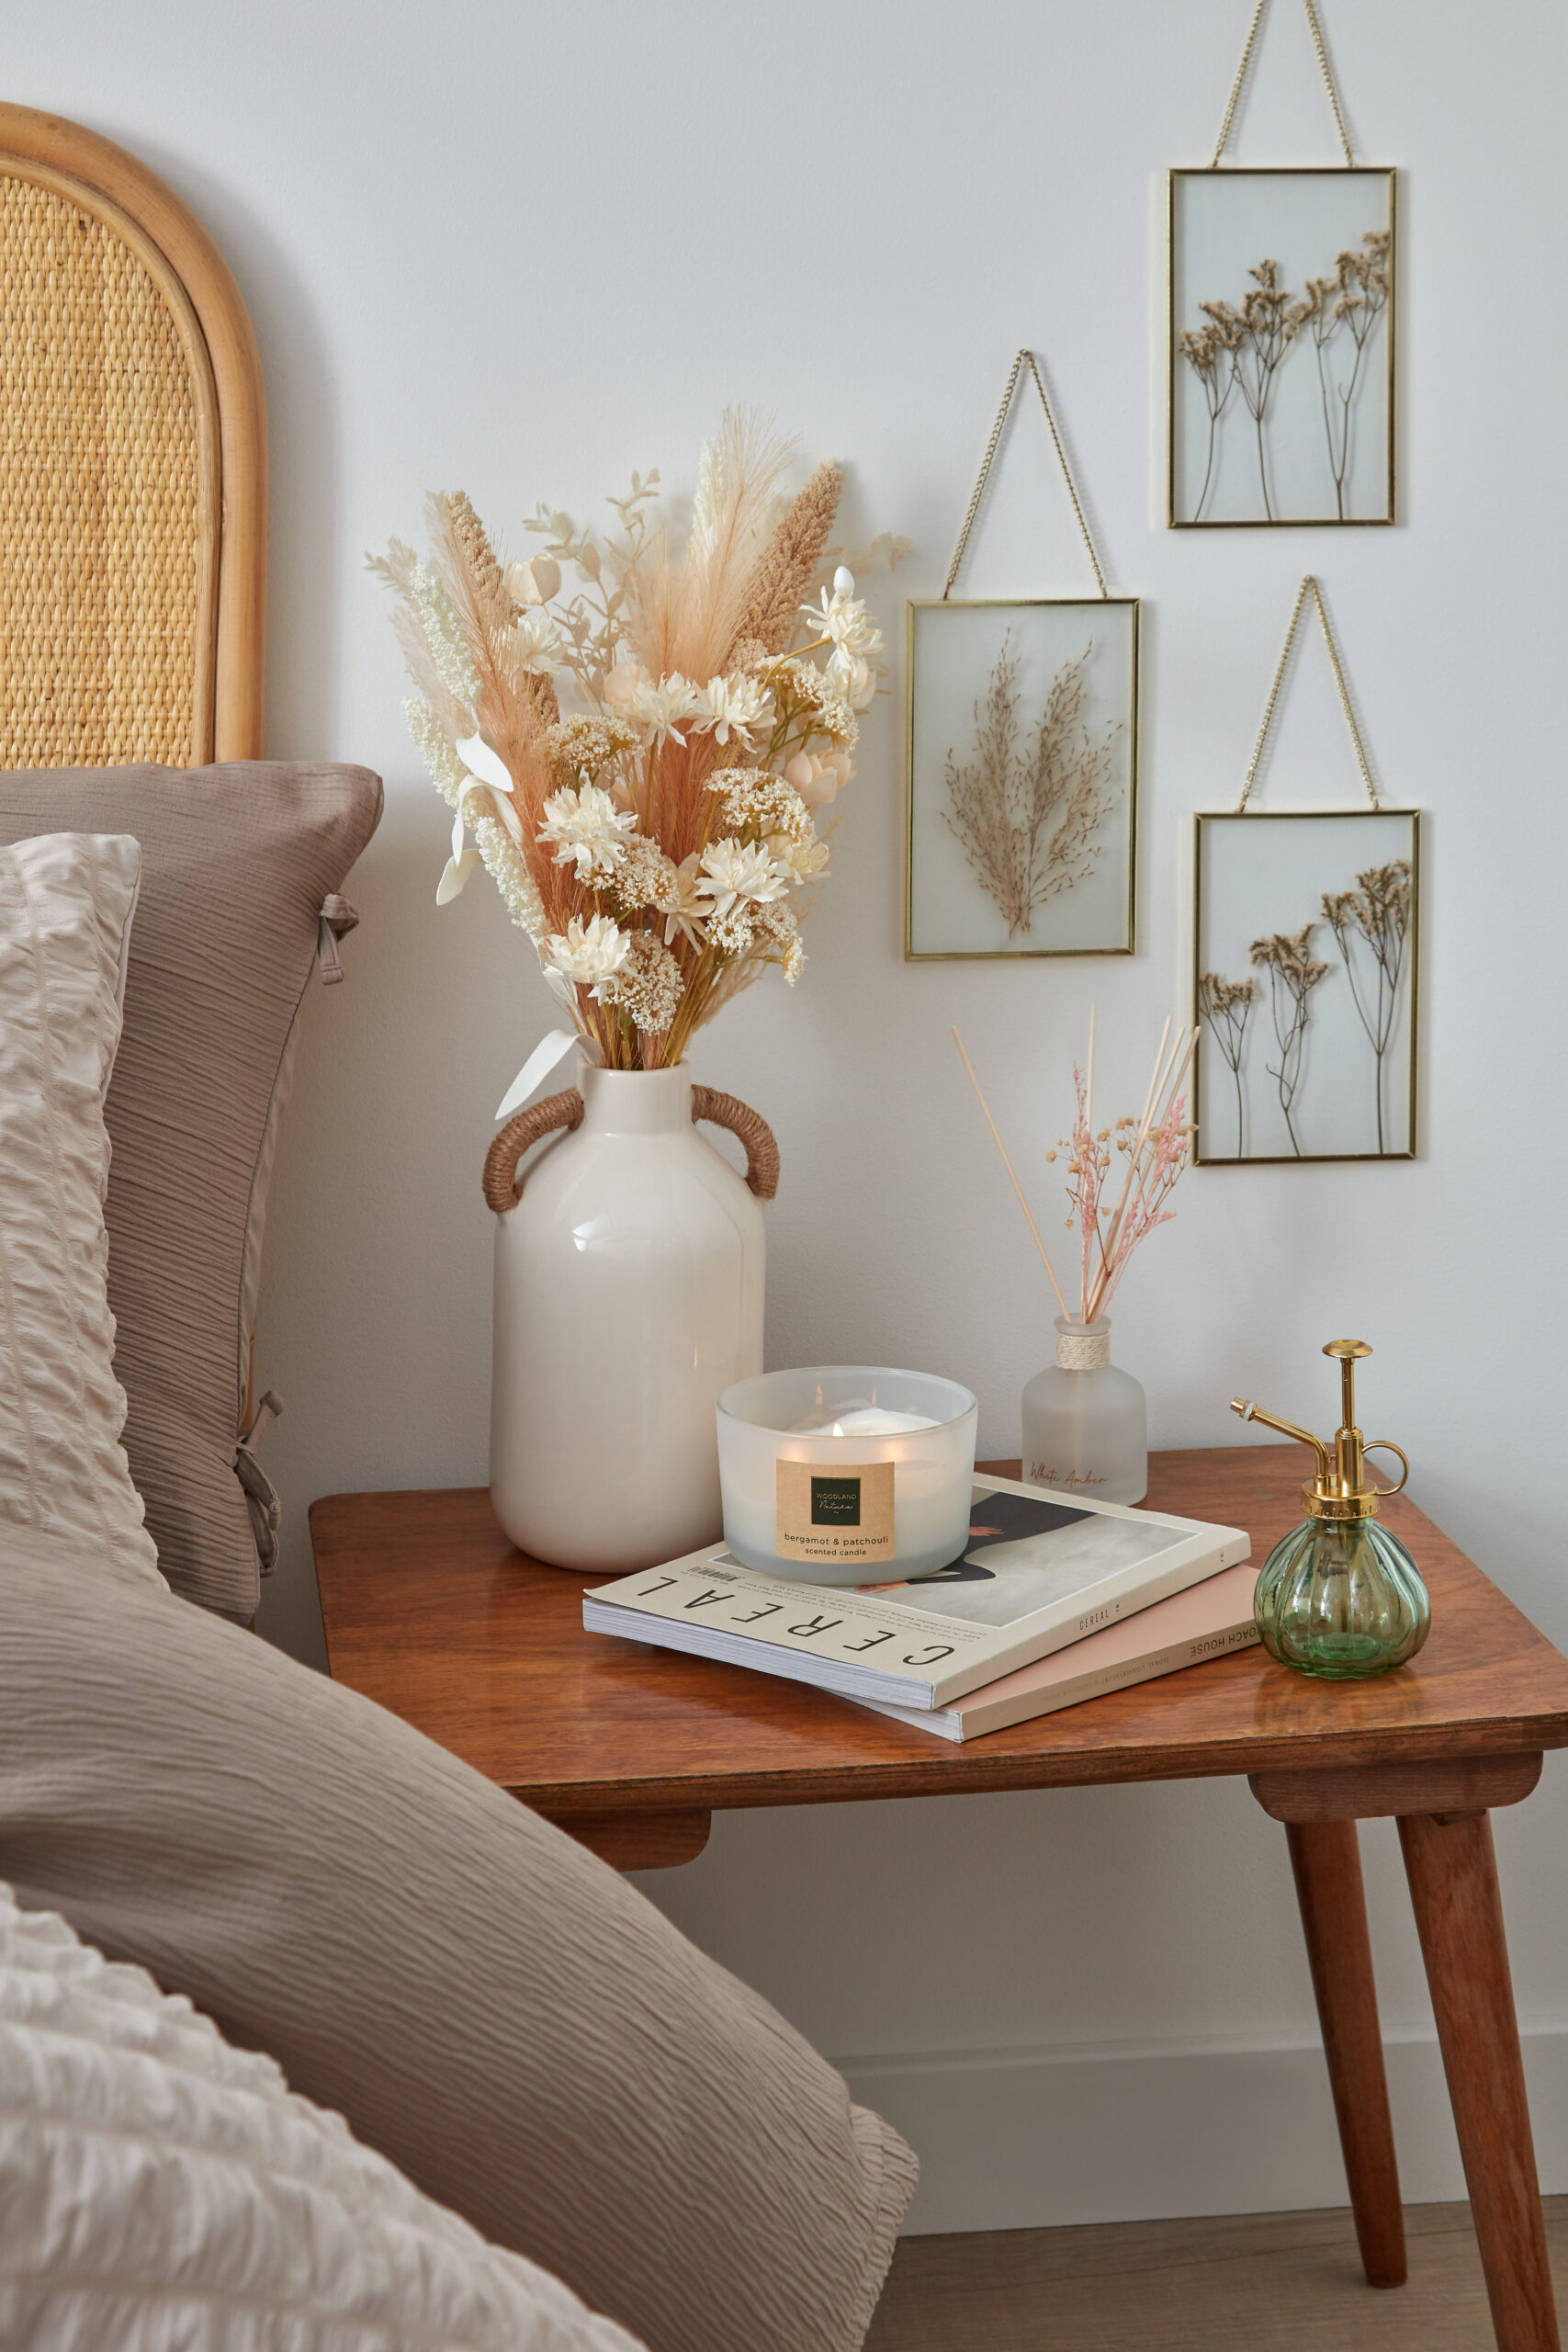 Whether for a special occasion or just because you love blooms, flowers are an easy way to add colour, scent and style into your space. Check out these 9 flower styling ideas are amongst the prettiest you'll have seen by Interior Stylist Maxine Brady. Dried flowers on a bedside table 